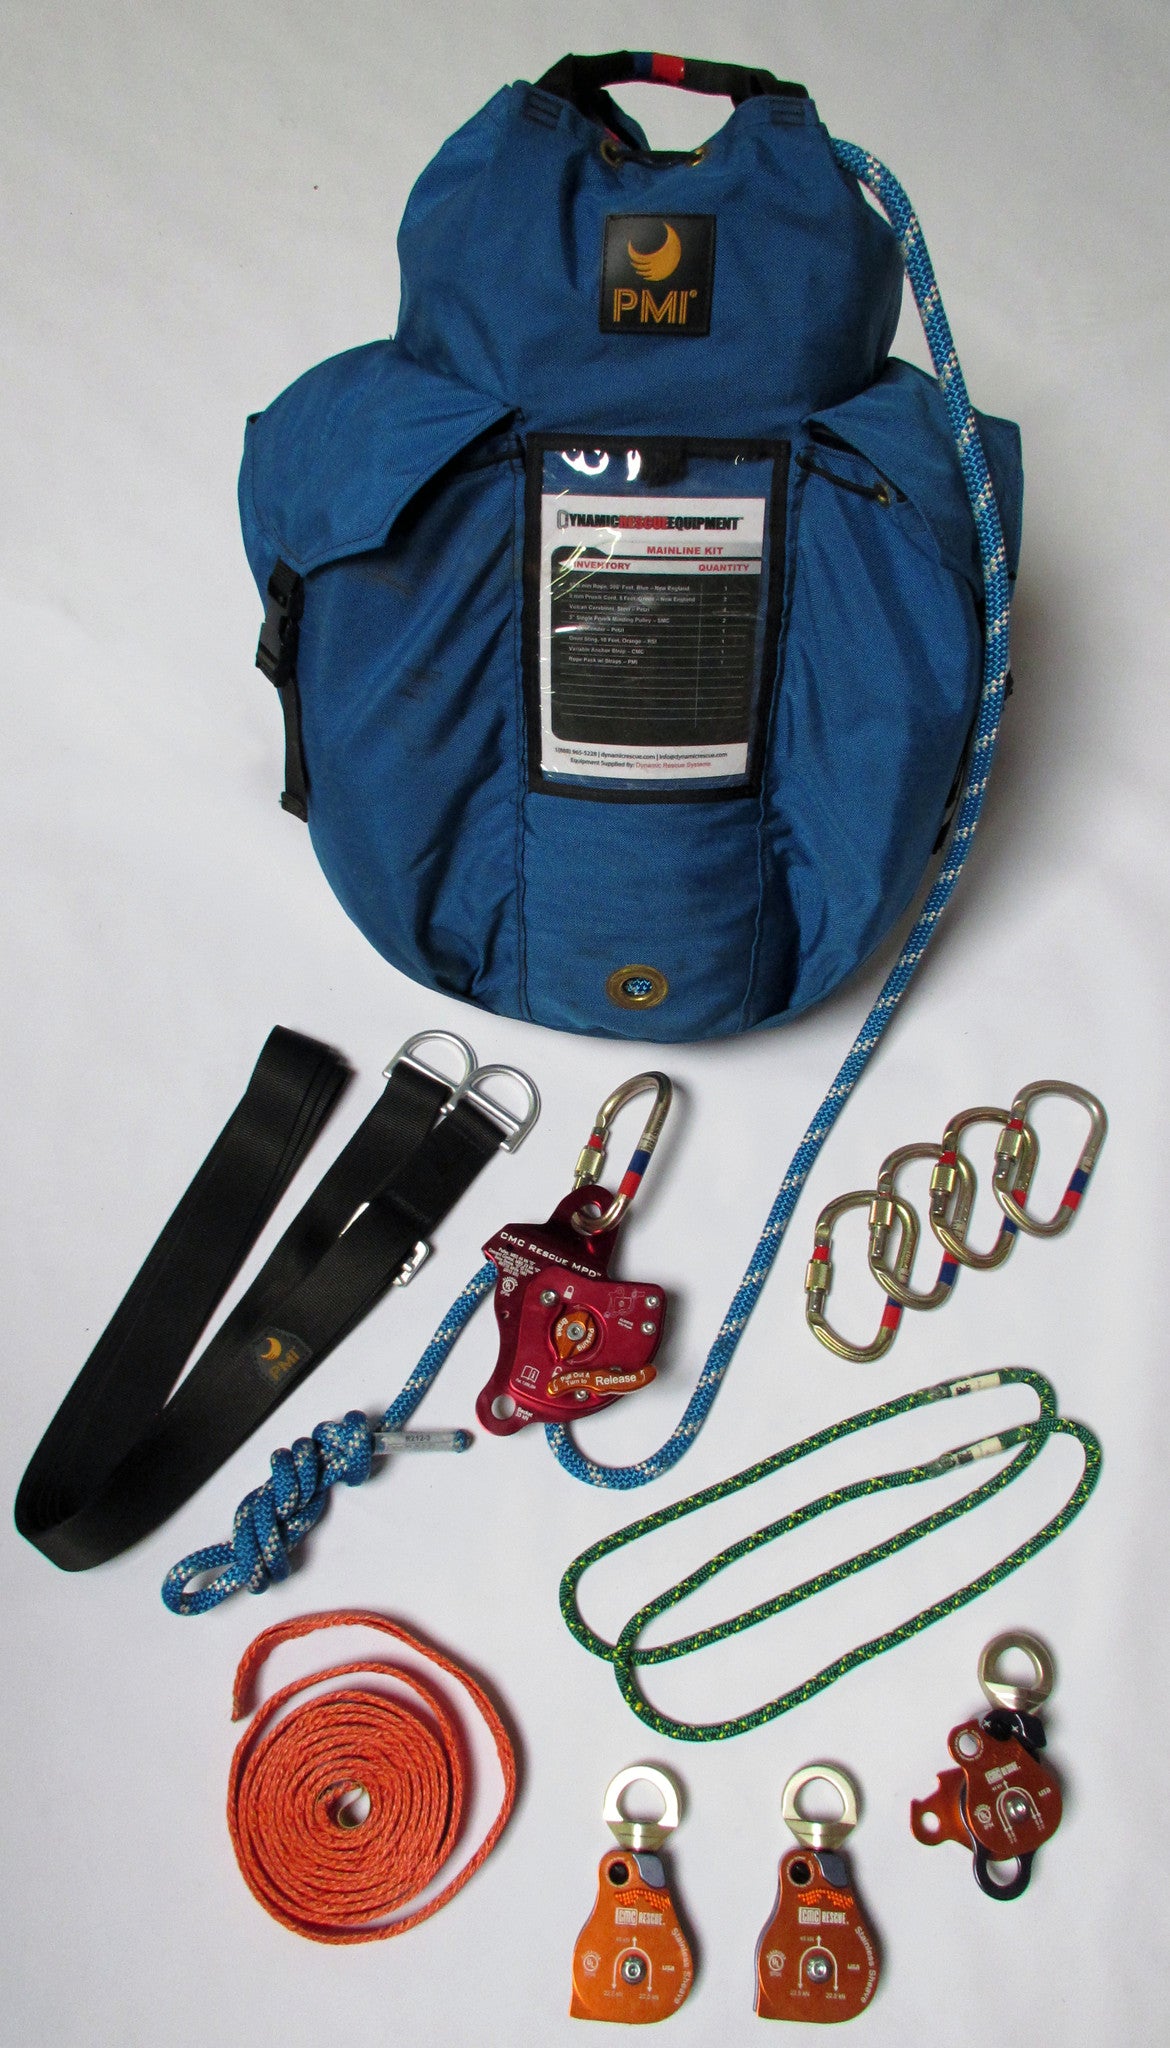 Pre-Packaged Mainline Kit for MPD - Dynamic Rescue